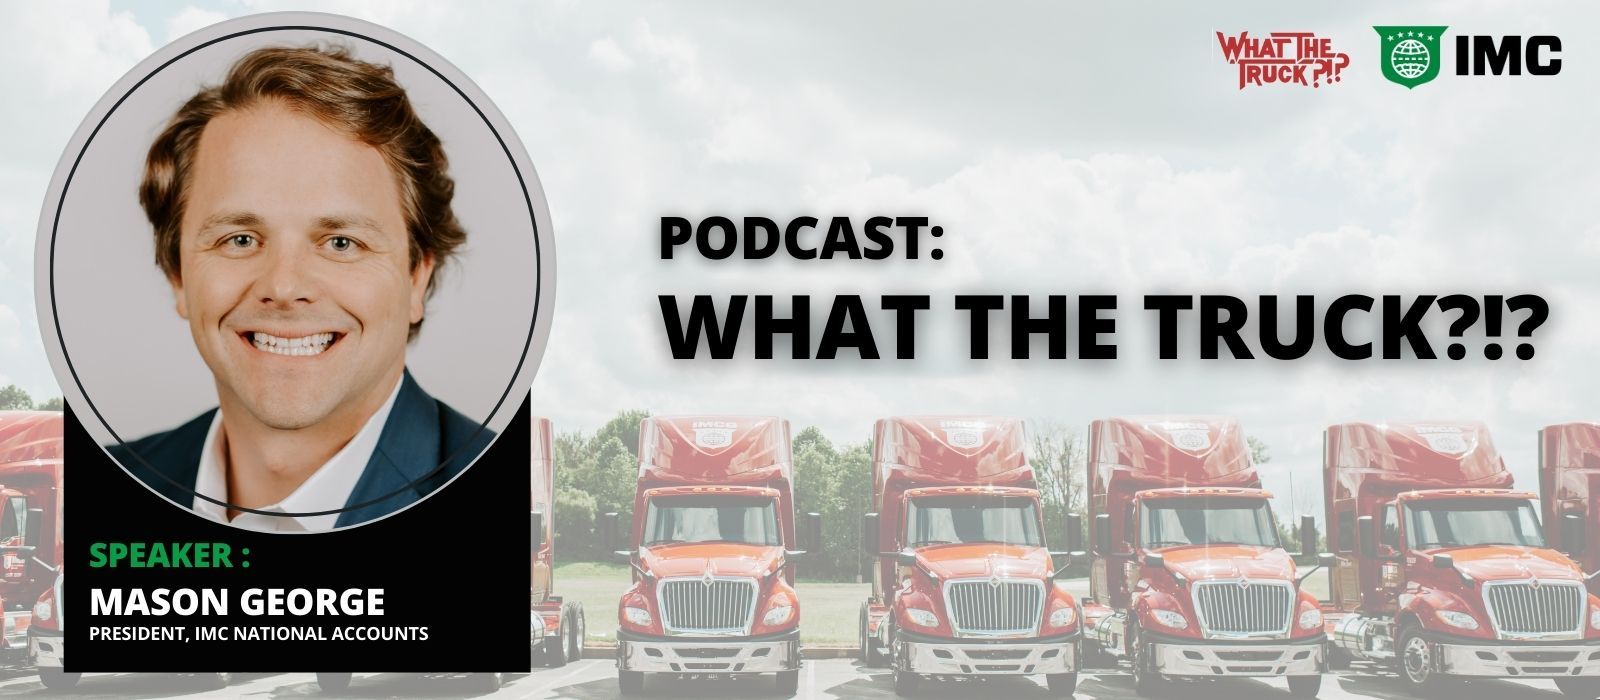 Mason George on the ‘What the Truck’ Podcast